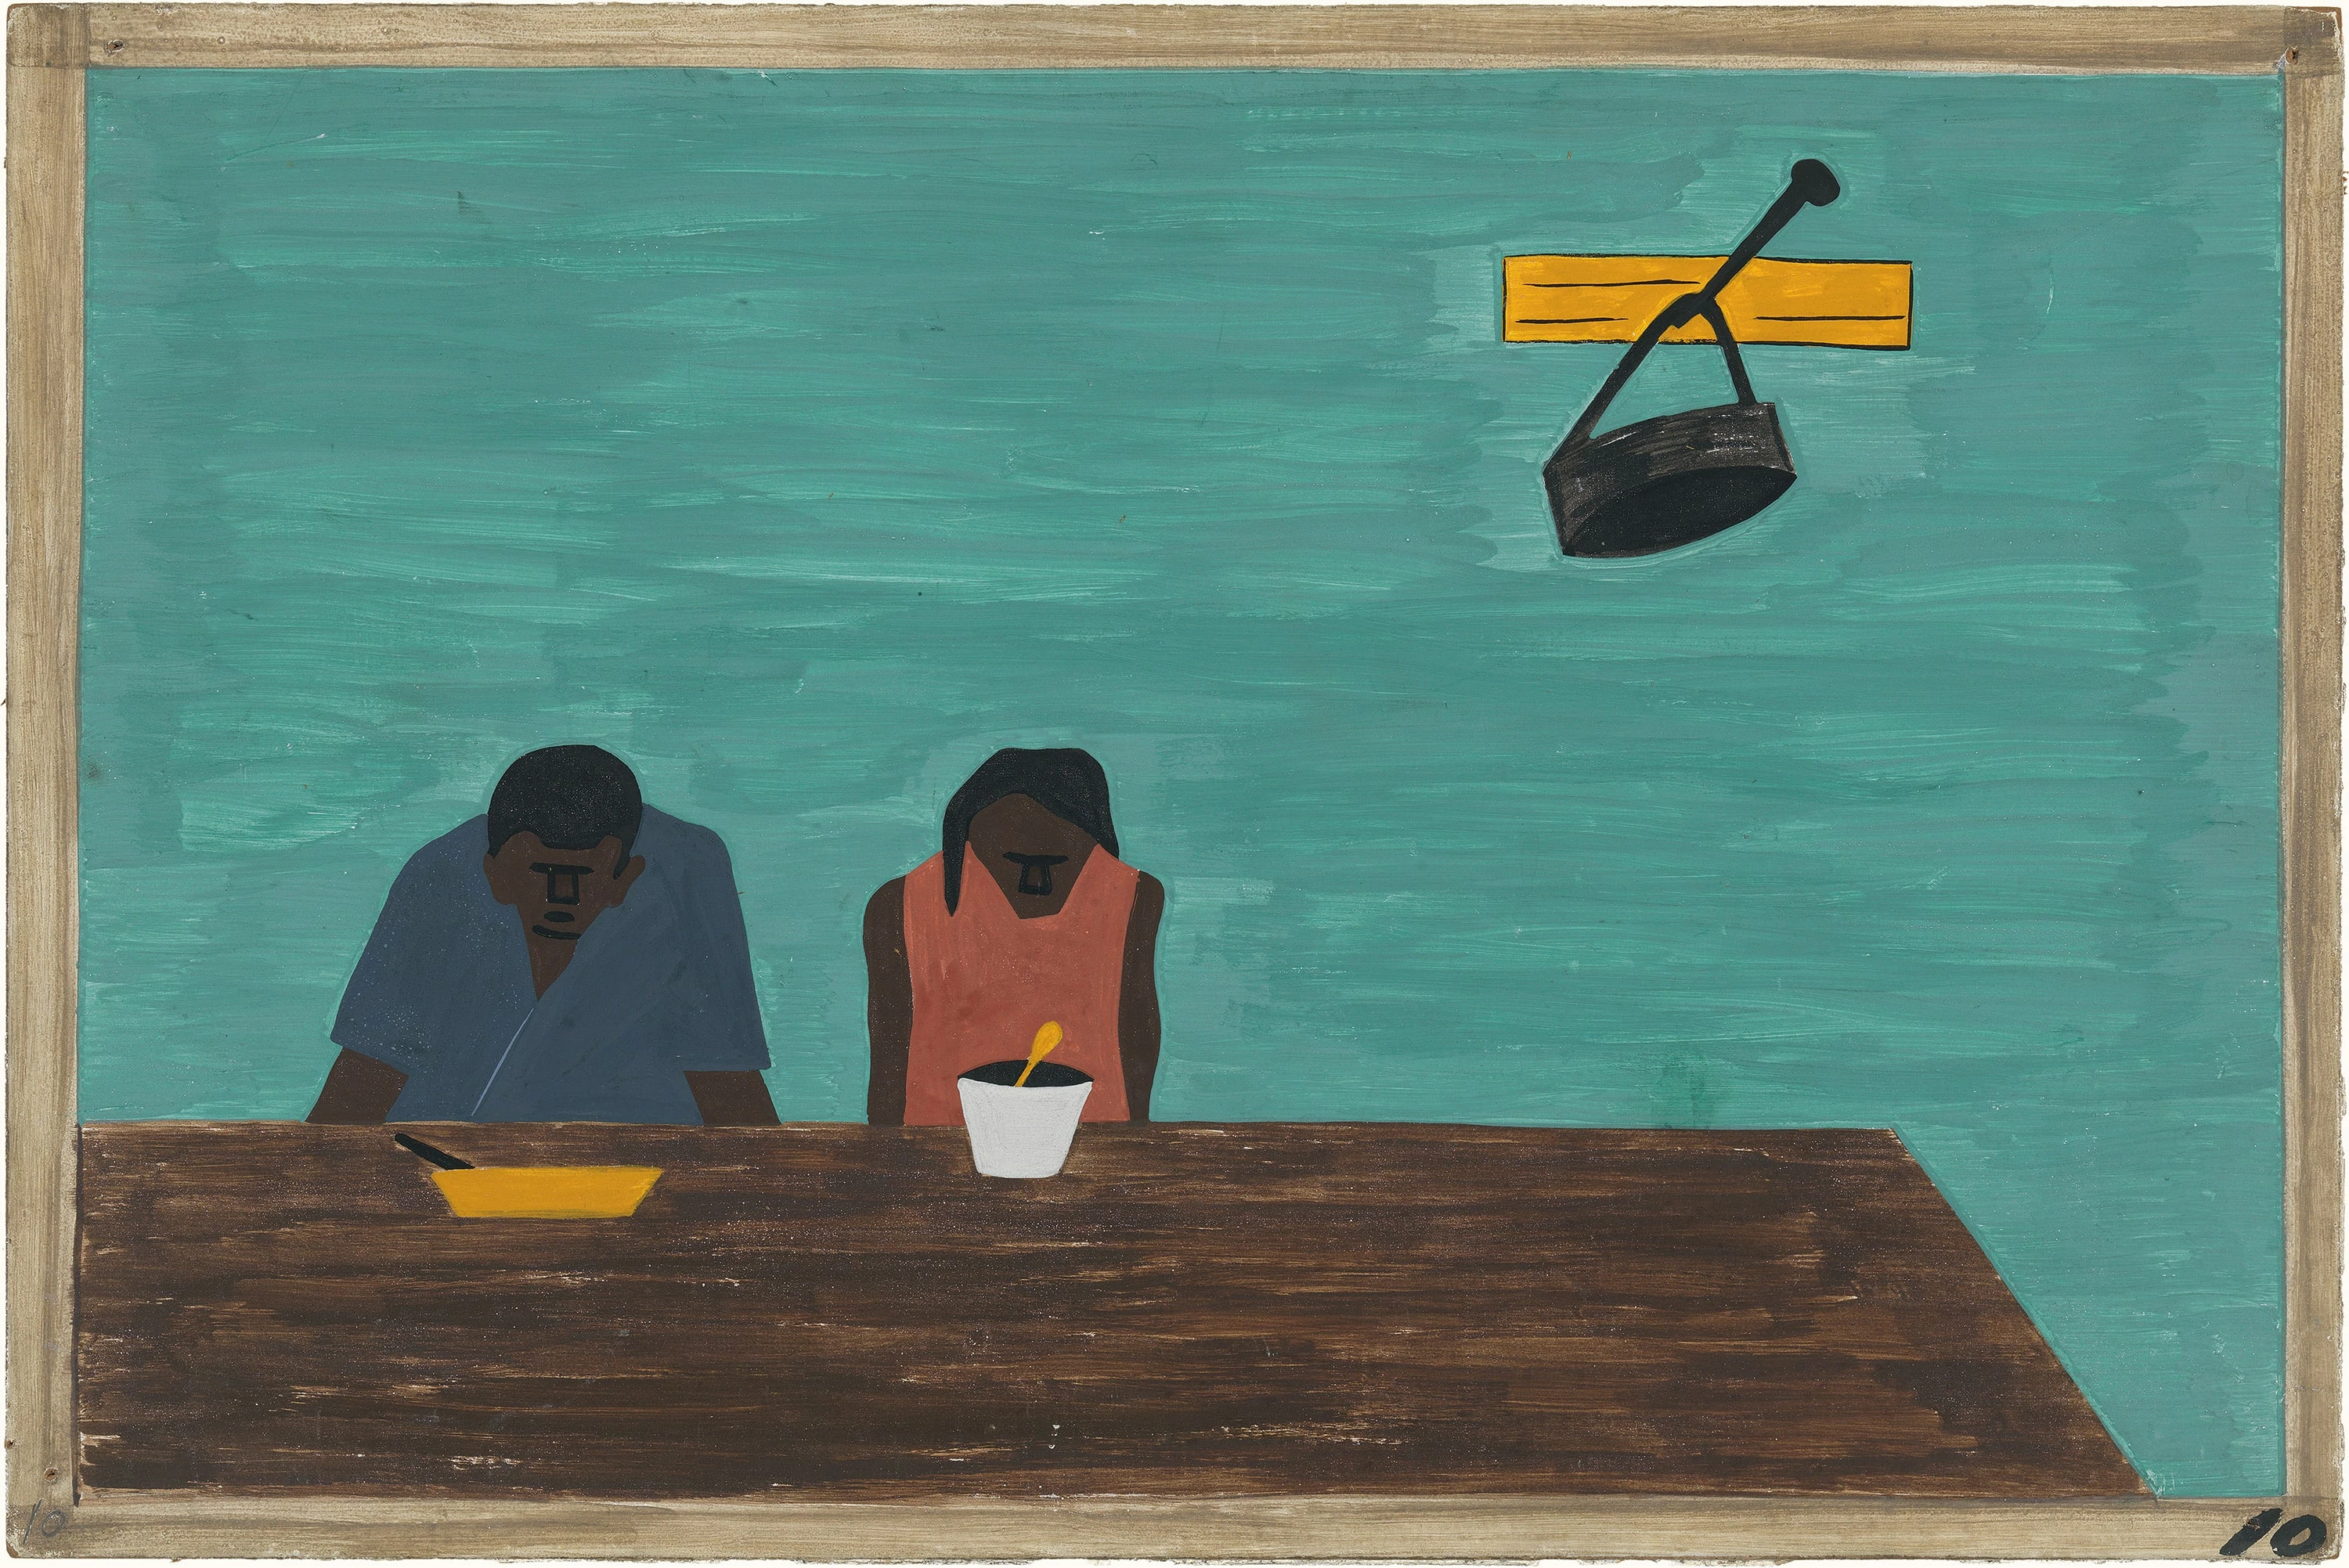 Migration Series No.10: They were very poor, Jacob Lawrence